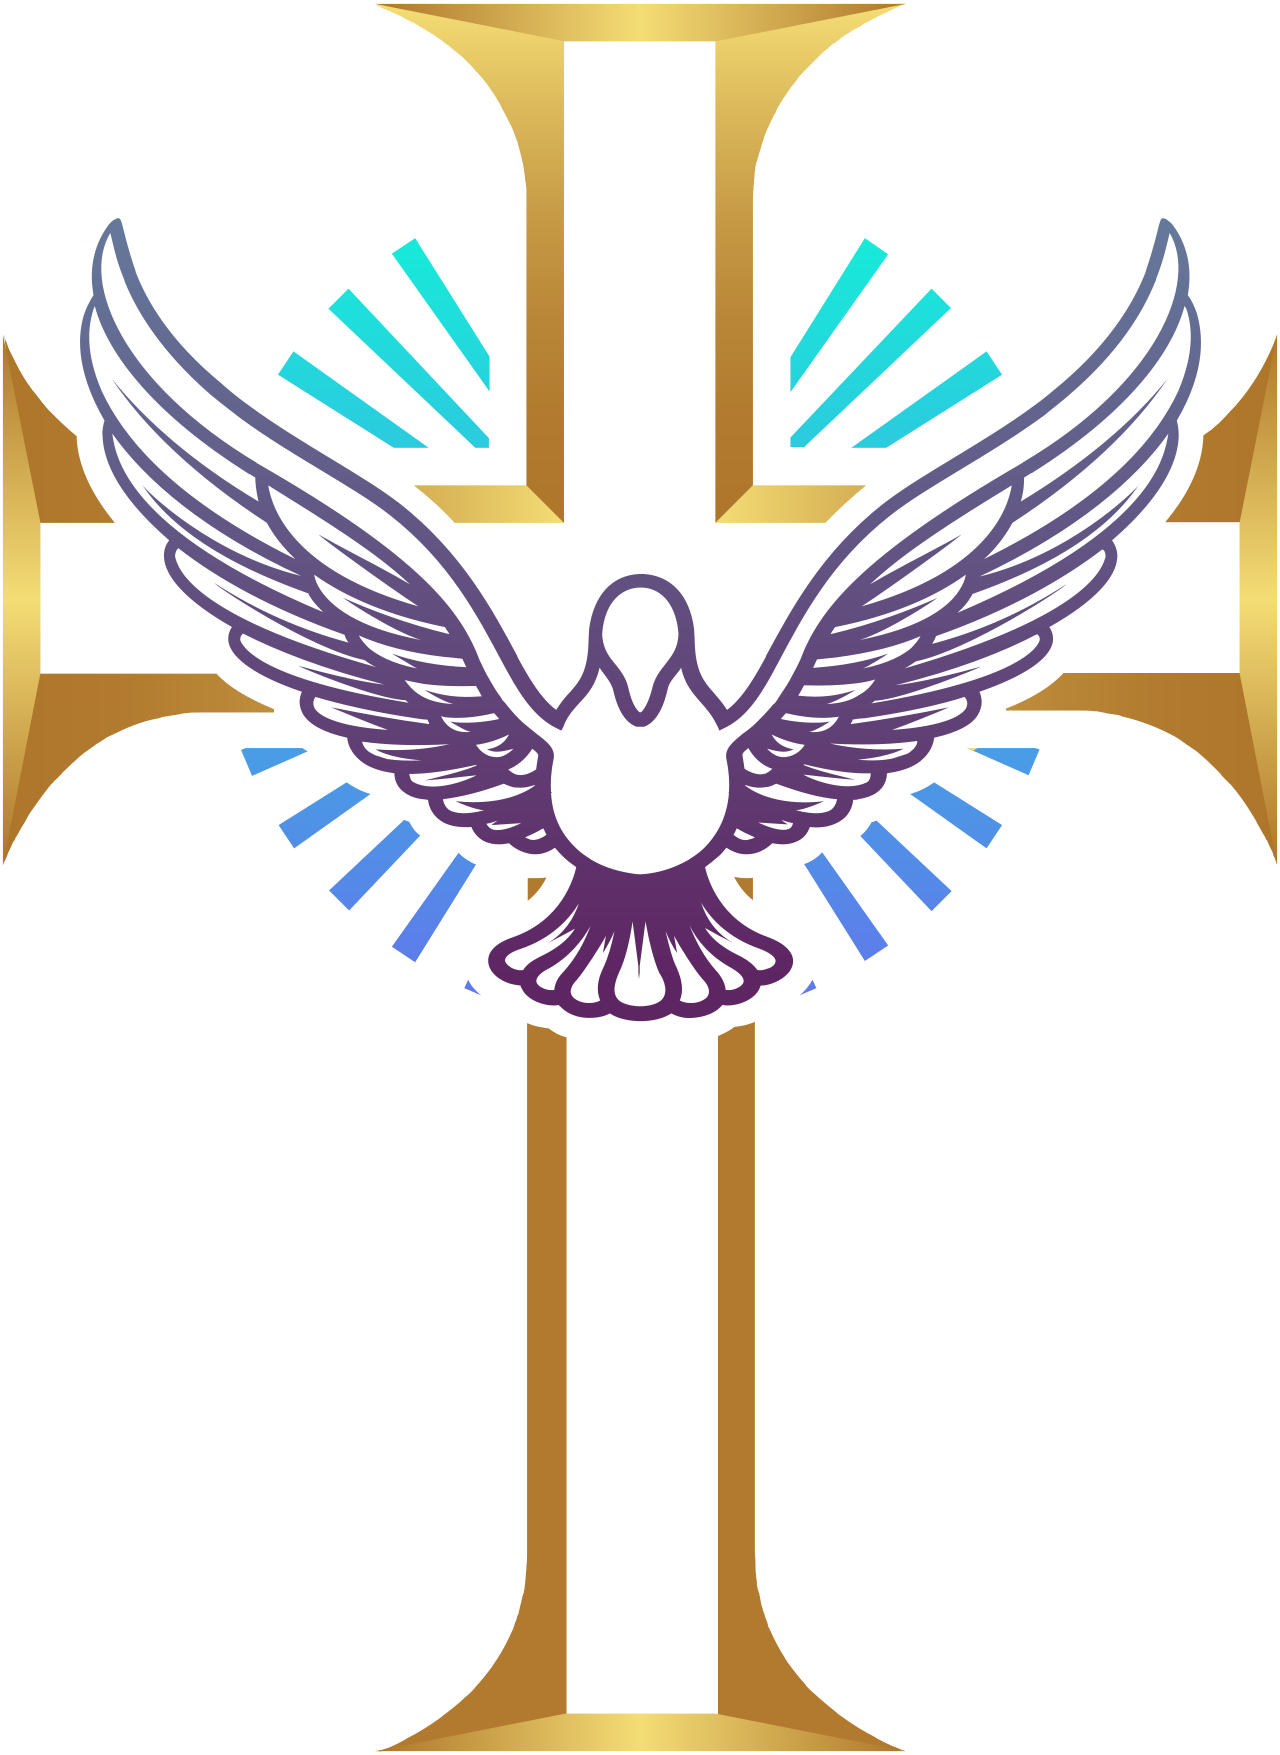 Soaring Place Ministry's logo